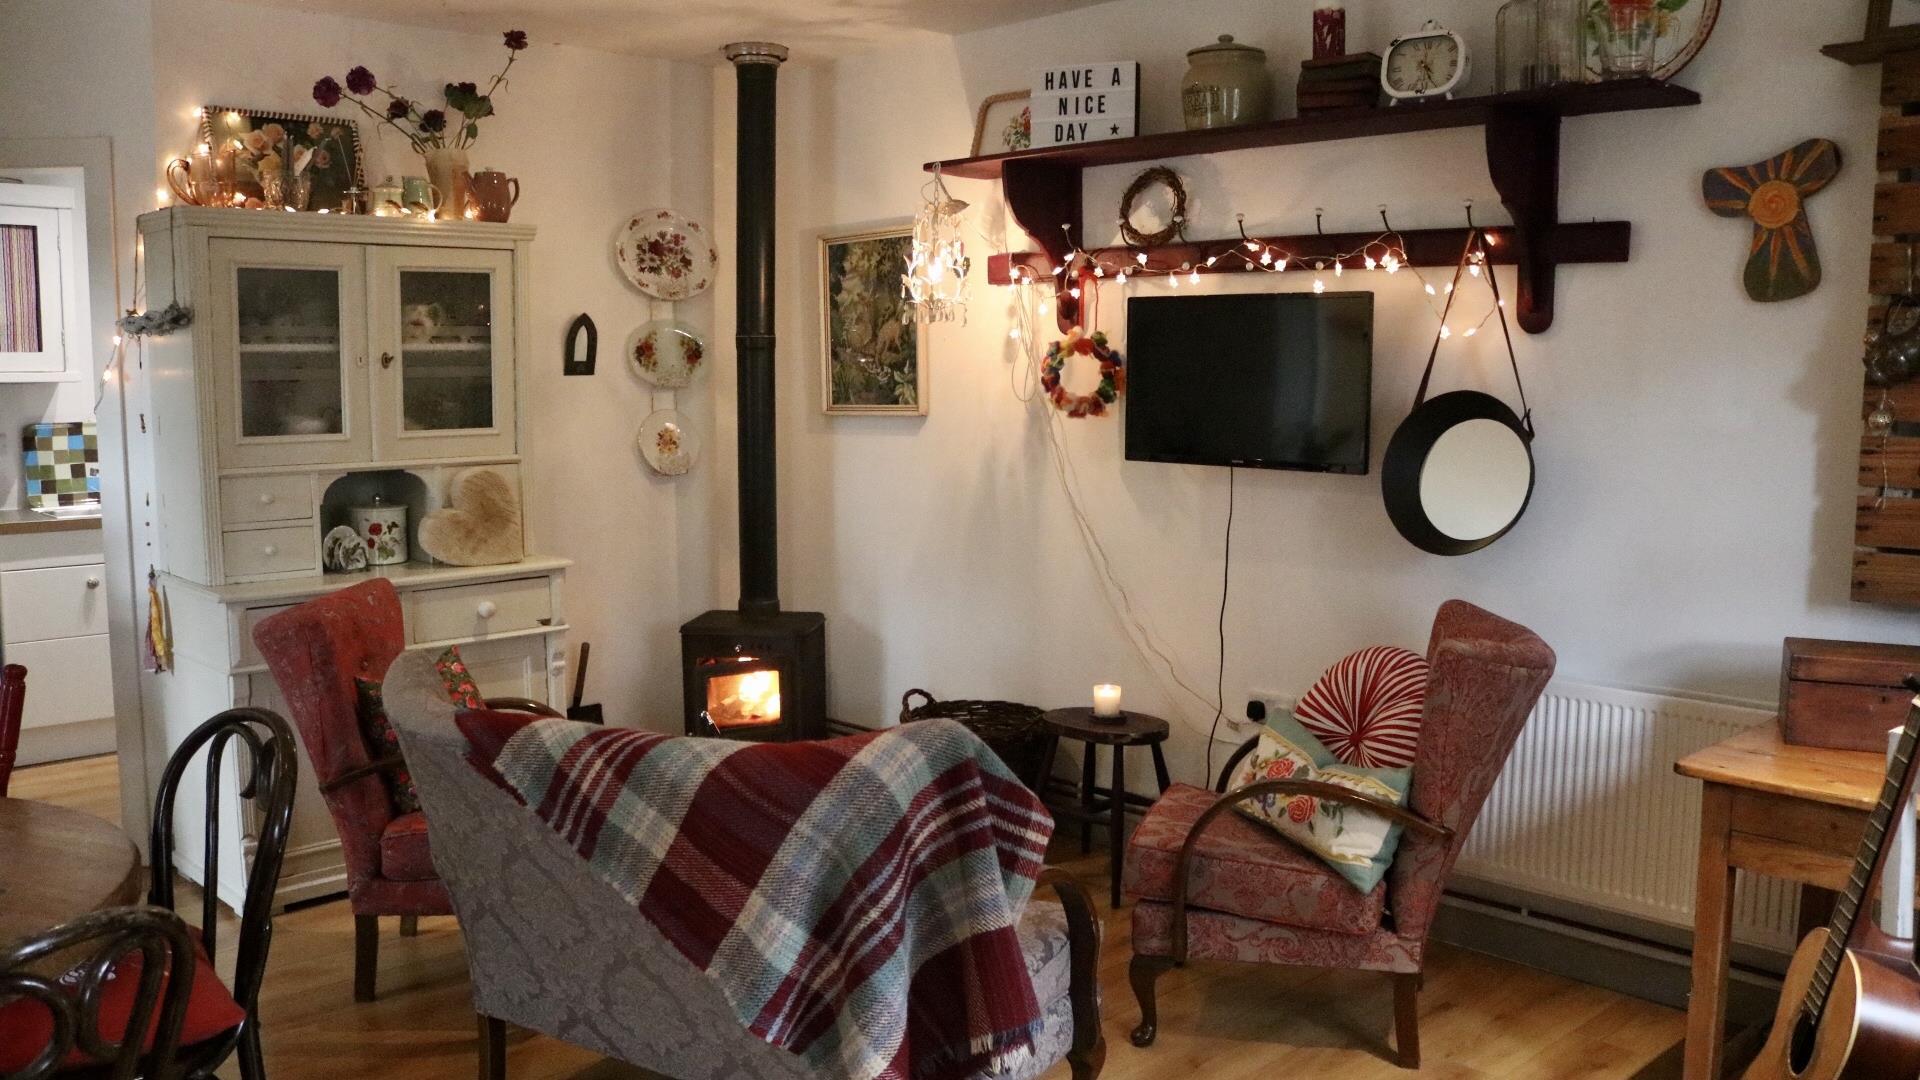 Image showing the living room decorated with fairylights